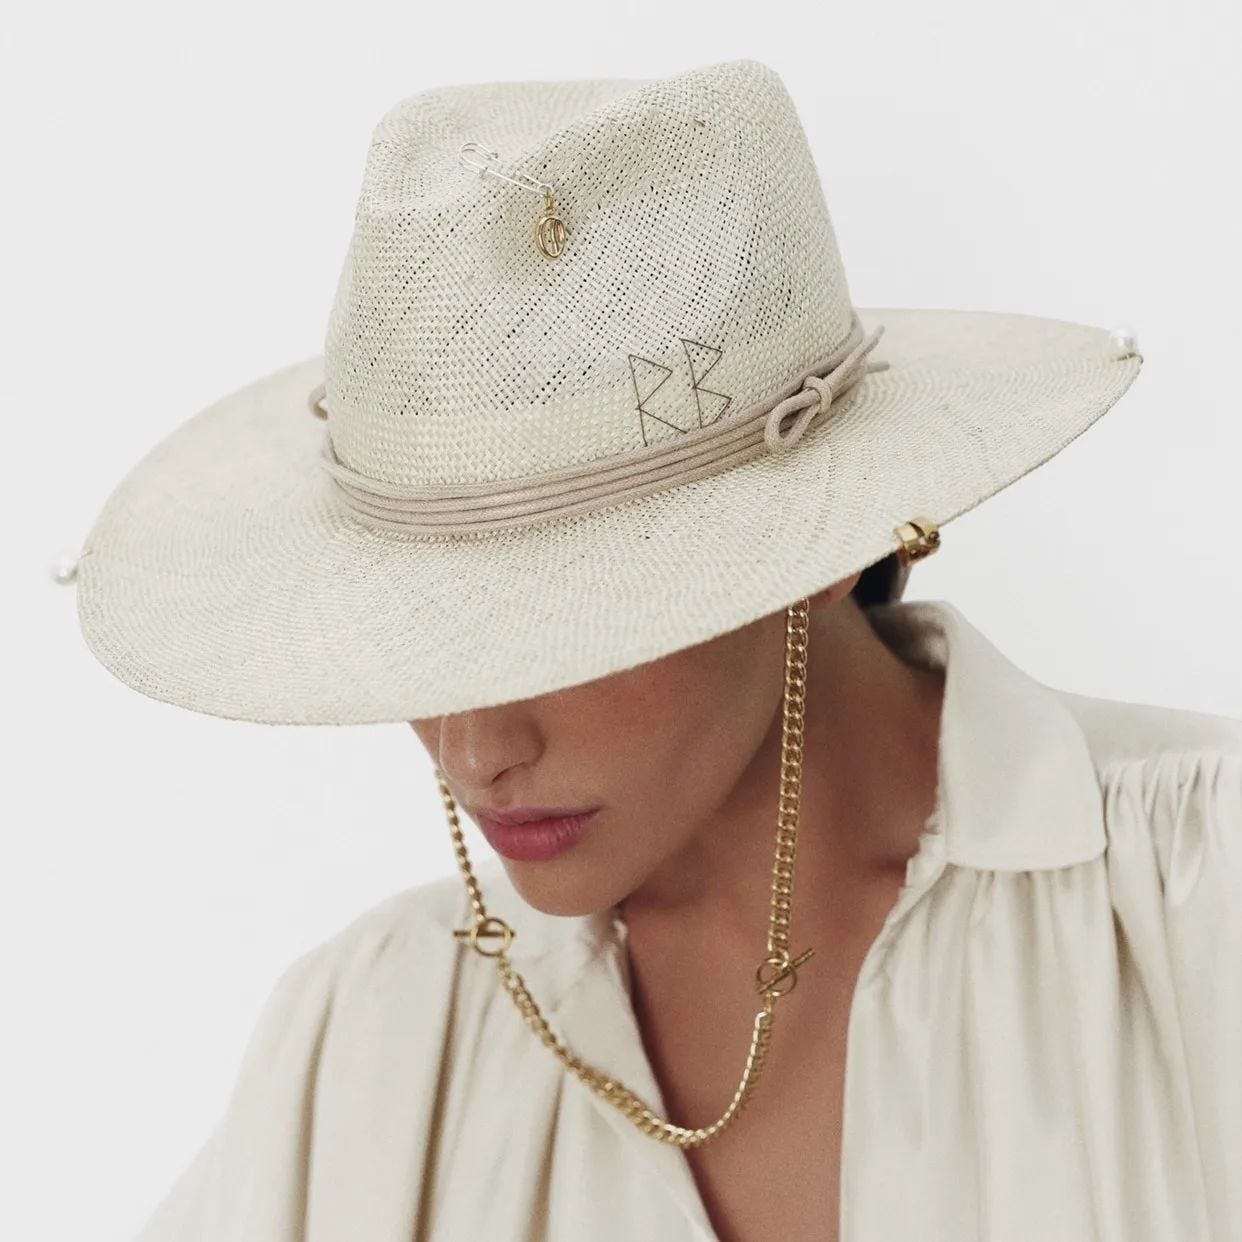 ACCESSORIES ALERT: looking for that extra stylish touch? Top off your look with @ruslanbaginskiy_hats.
This Fedora-style hat in woven straw will be a key piece for your upcoming summer outfits.
Discover the Spring/Summer 2022 collection on genteroma.com and in our boutiques.

#GenteRoma #RuslanBaginskiy #SS22